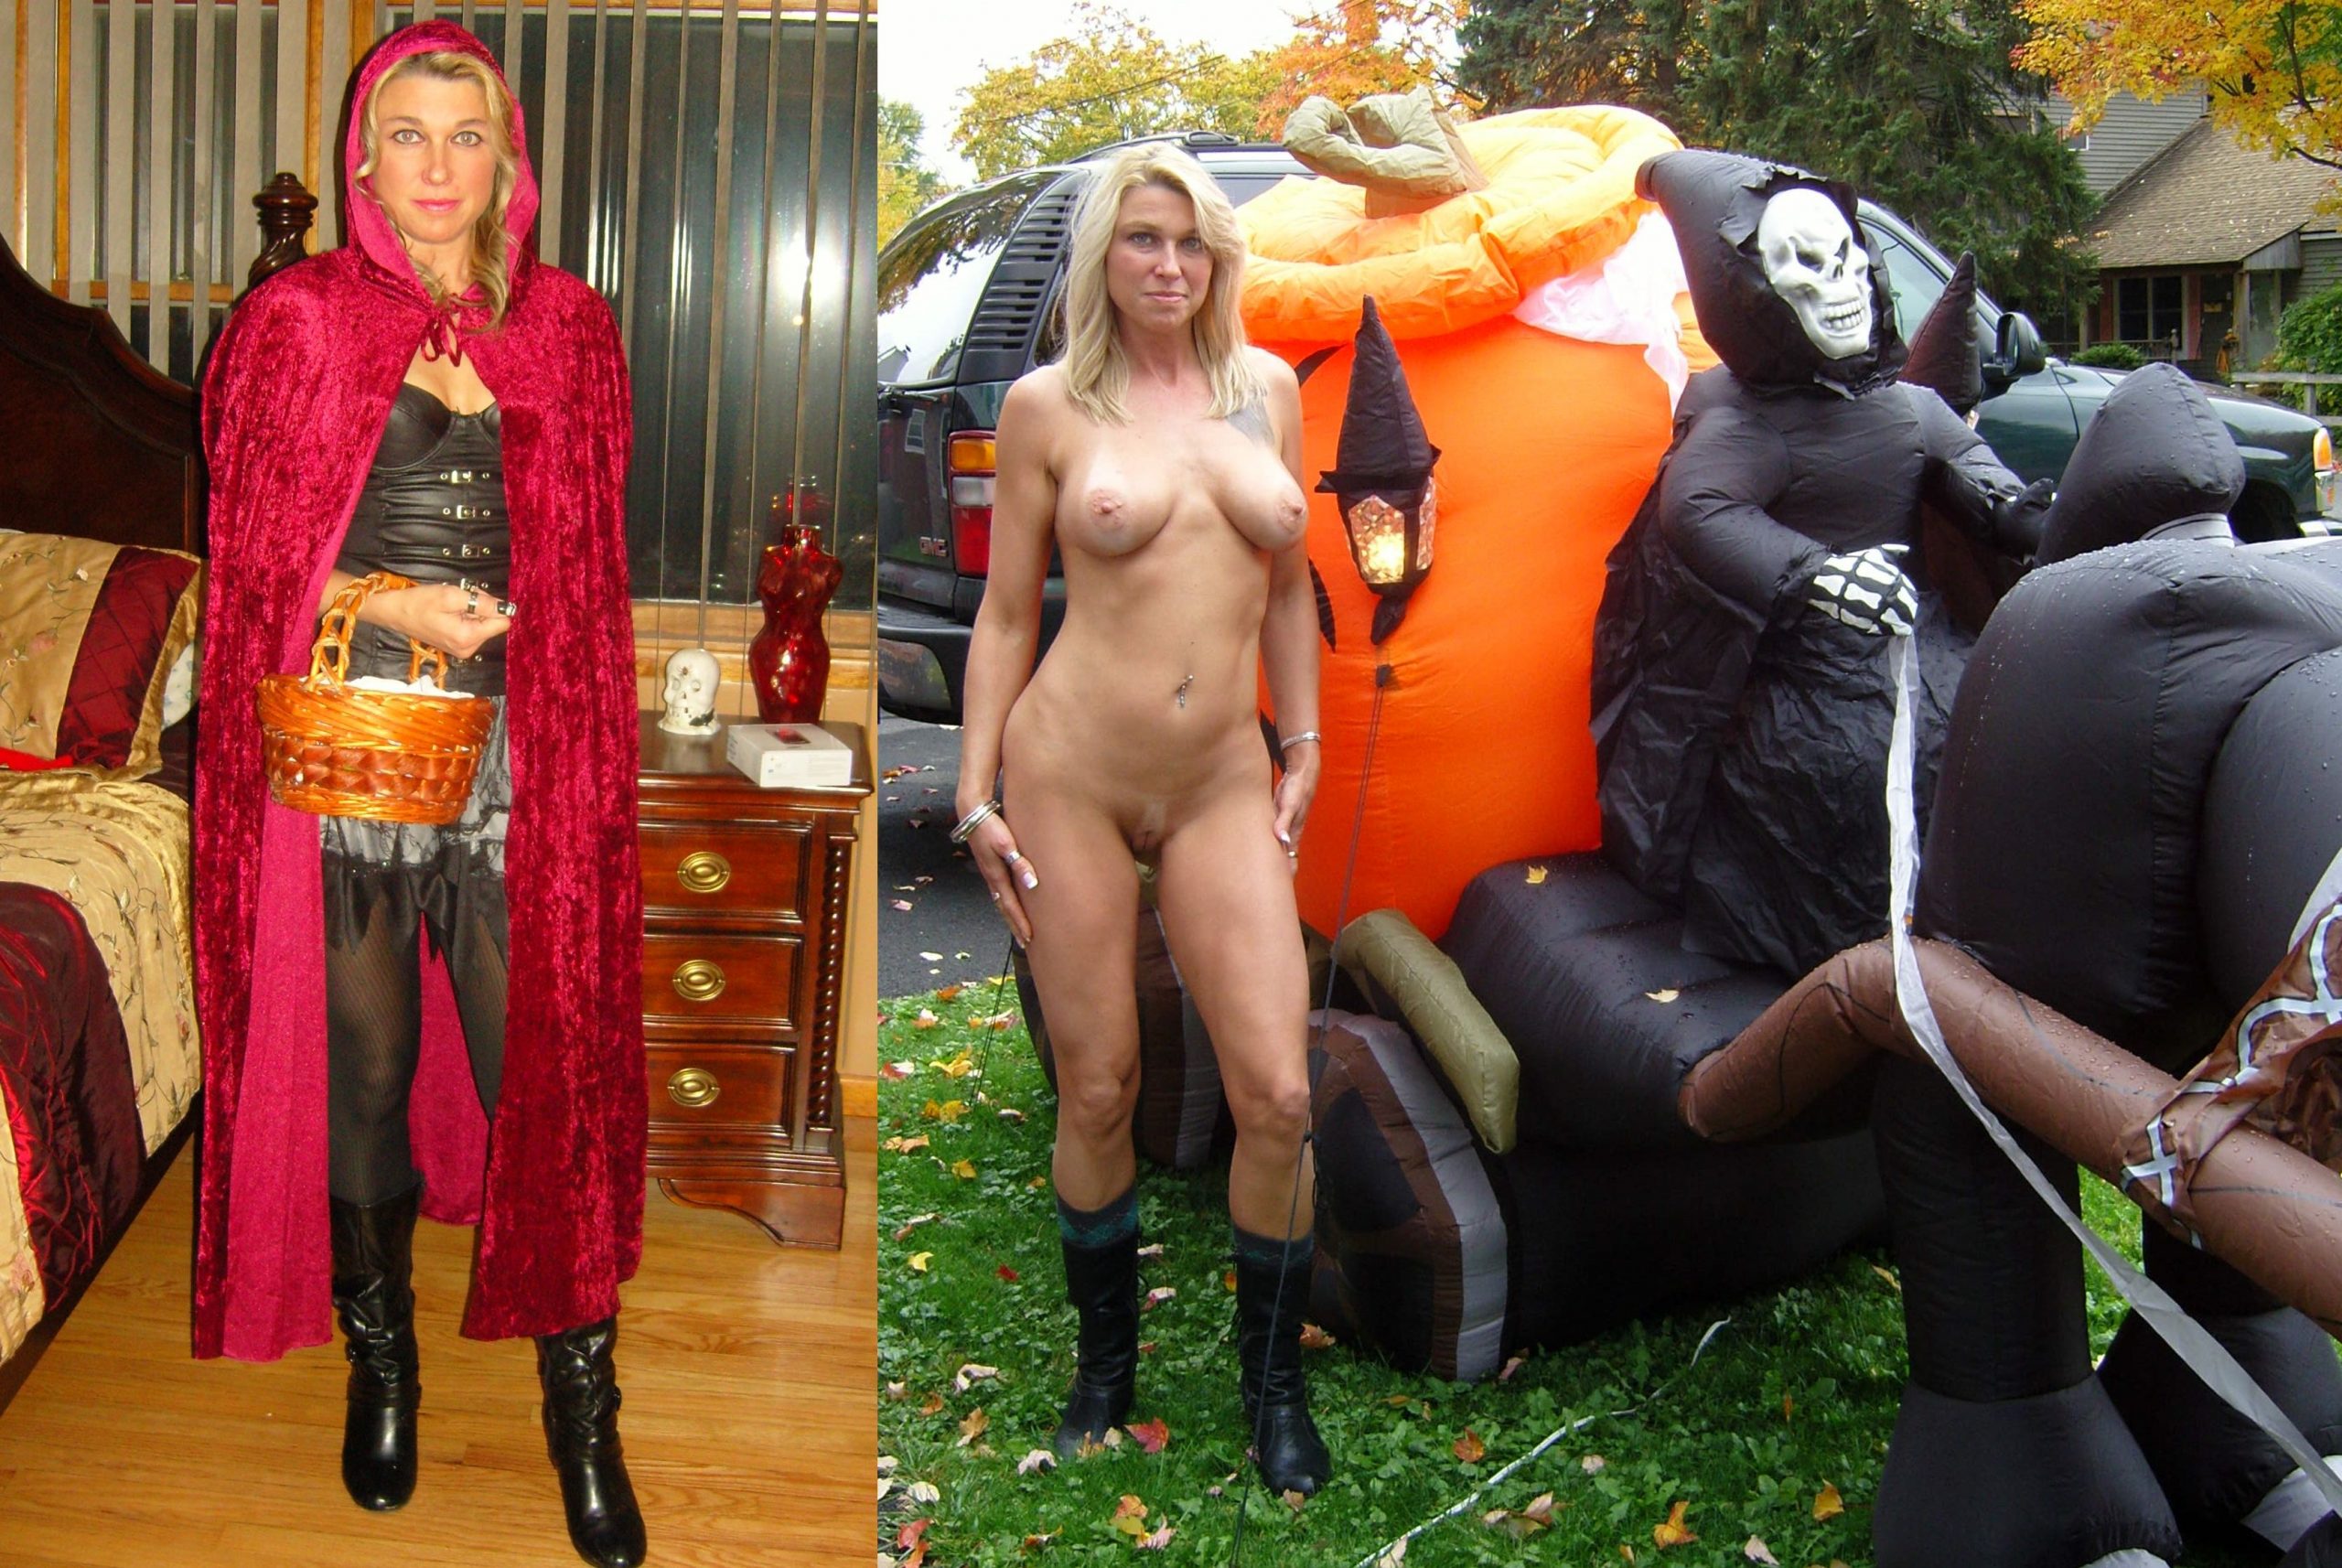 Little Red Riding nude Archives - NudeCosplayGirls.com